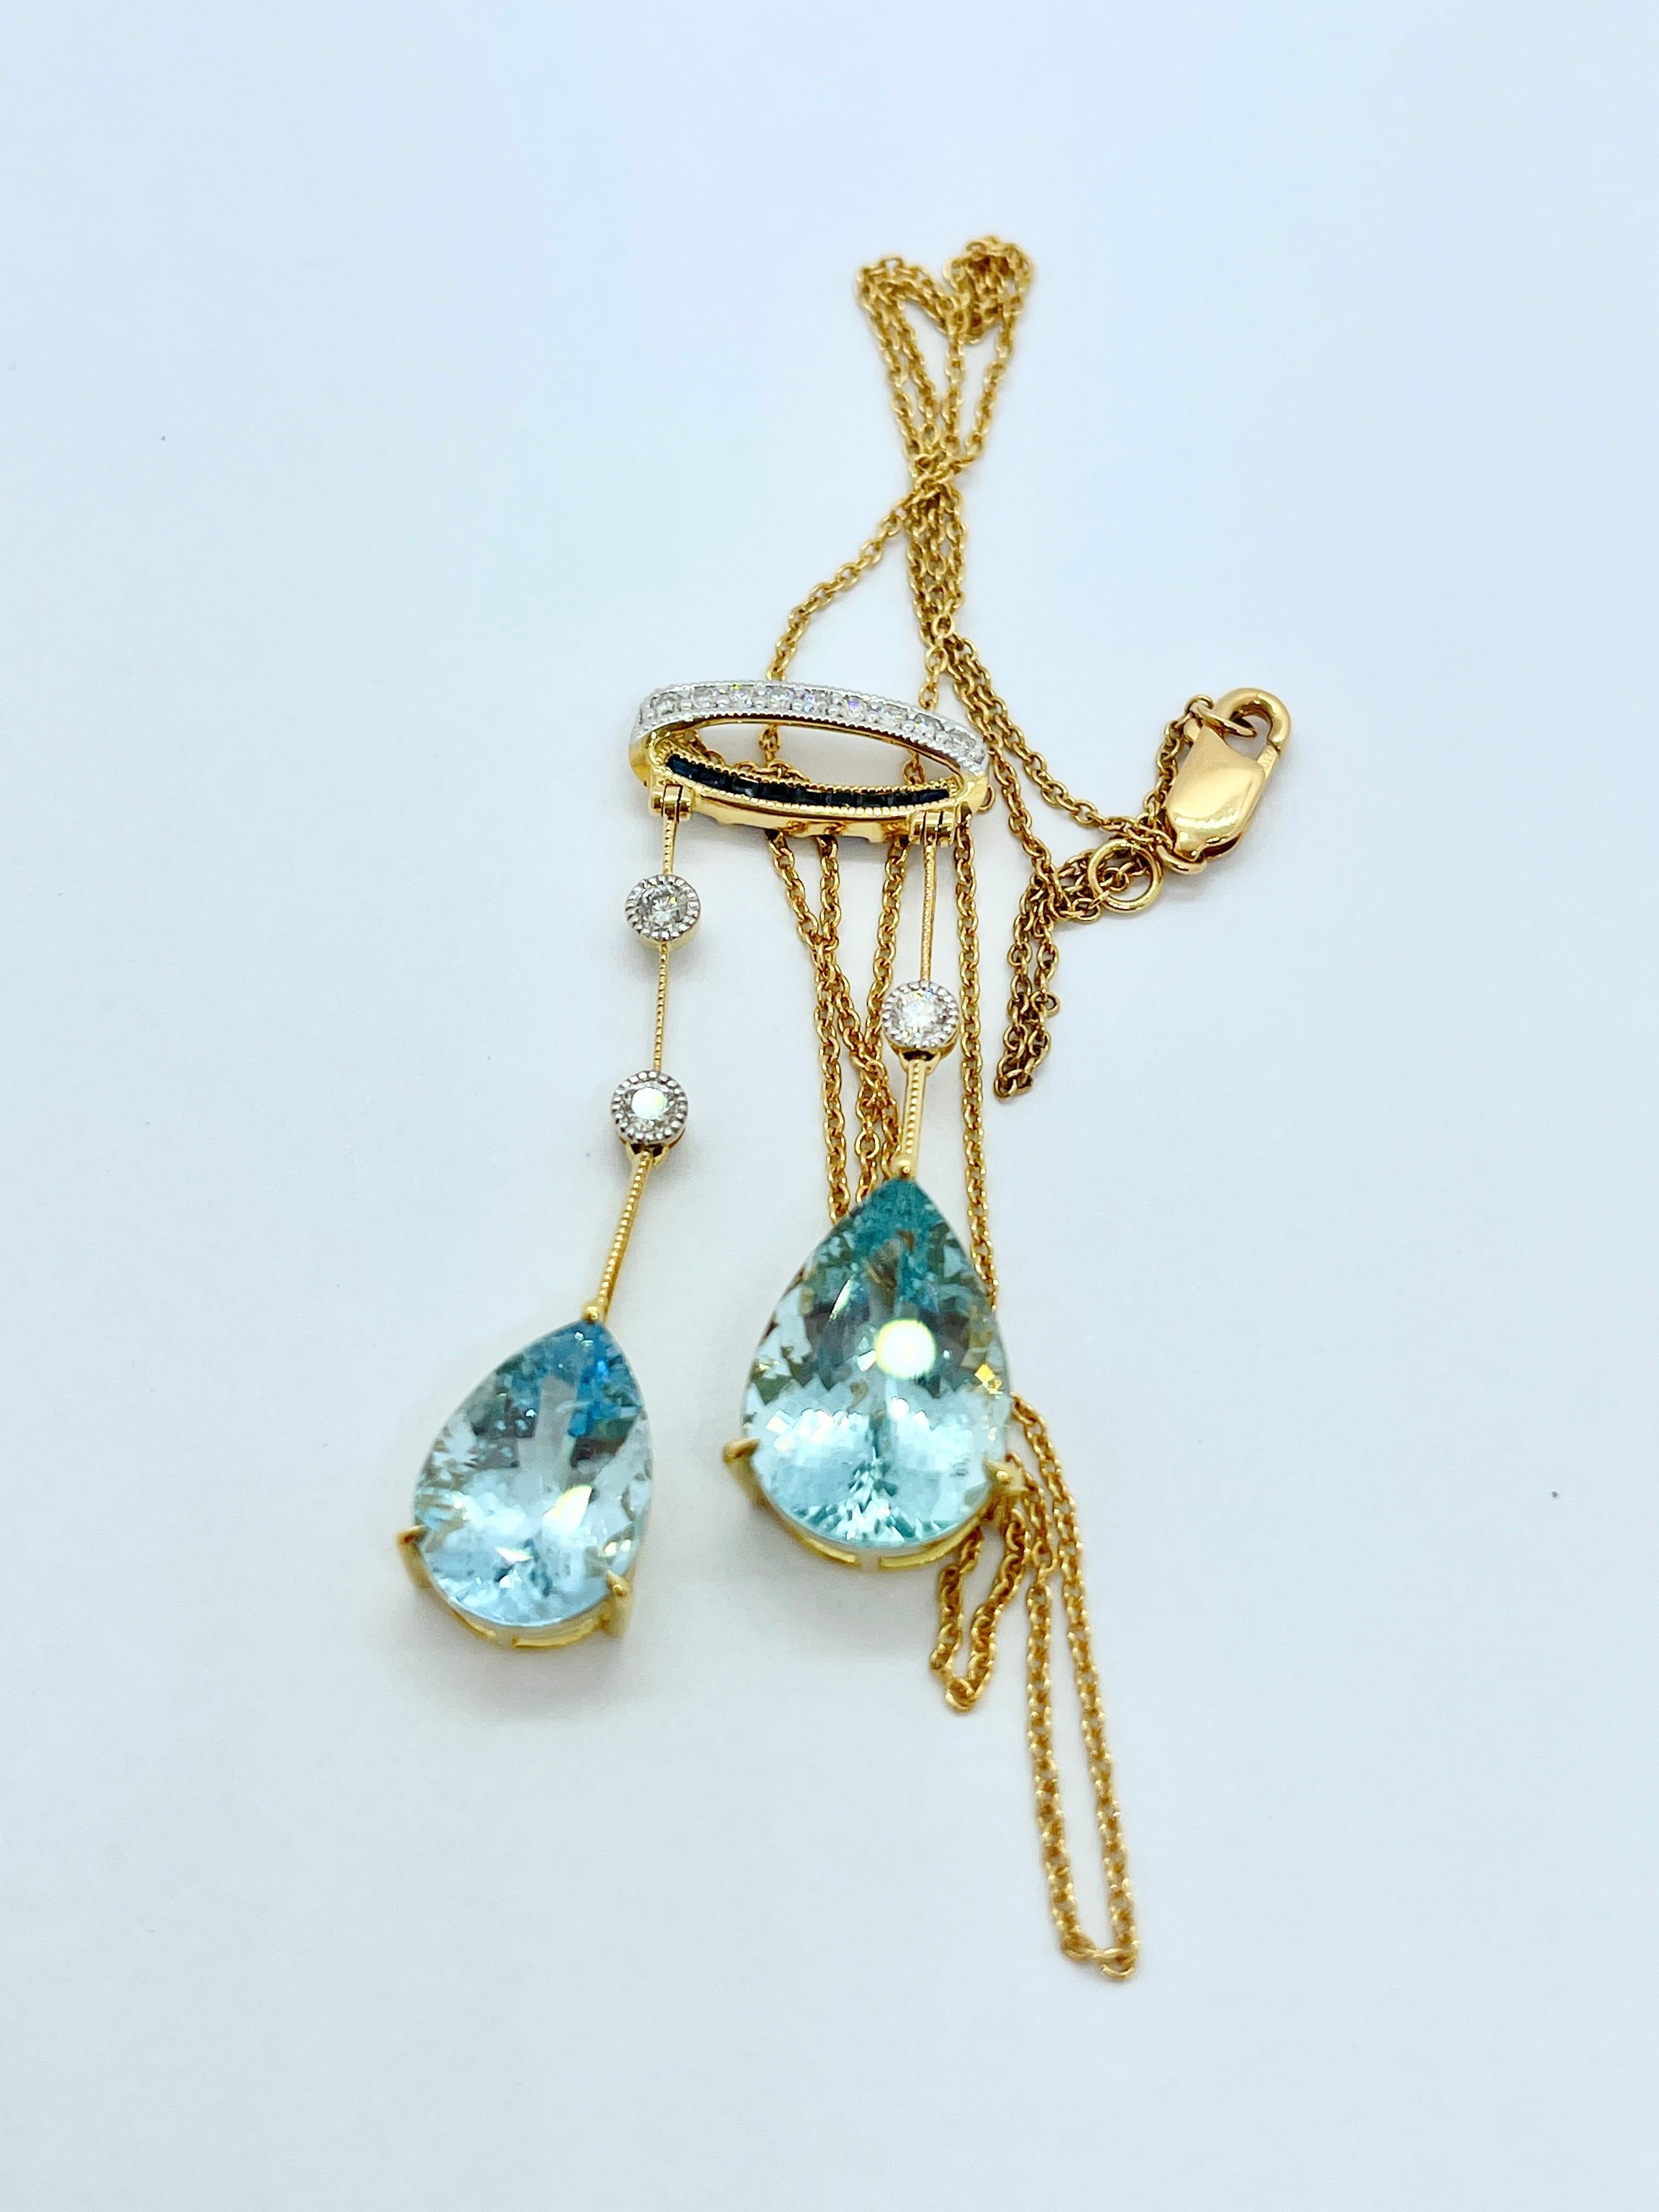 Women's Natural Pear Shaped Aquamarine Diamond, Sapphire Pendant Necklace with Valuation For Sale